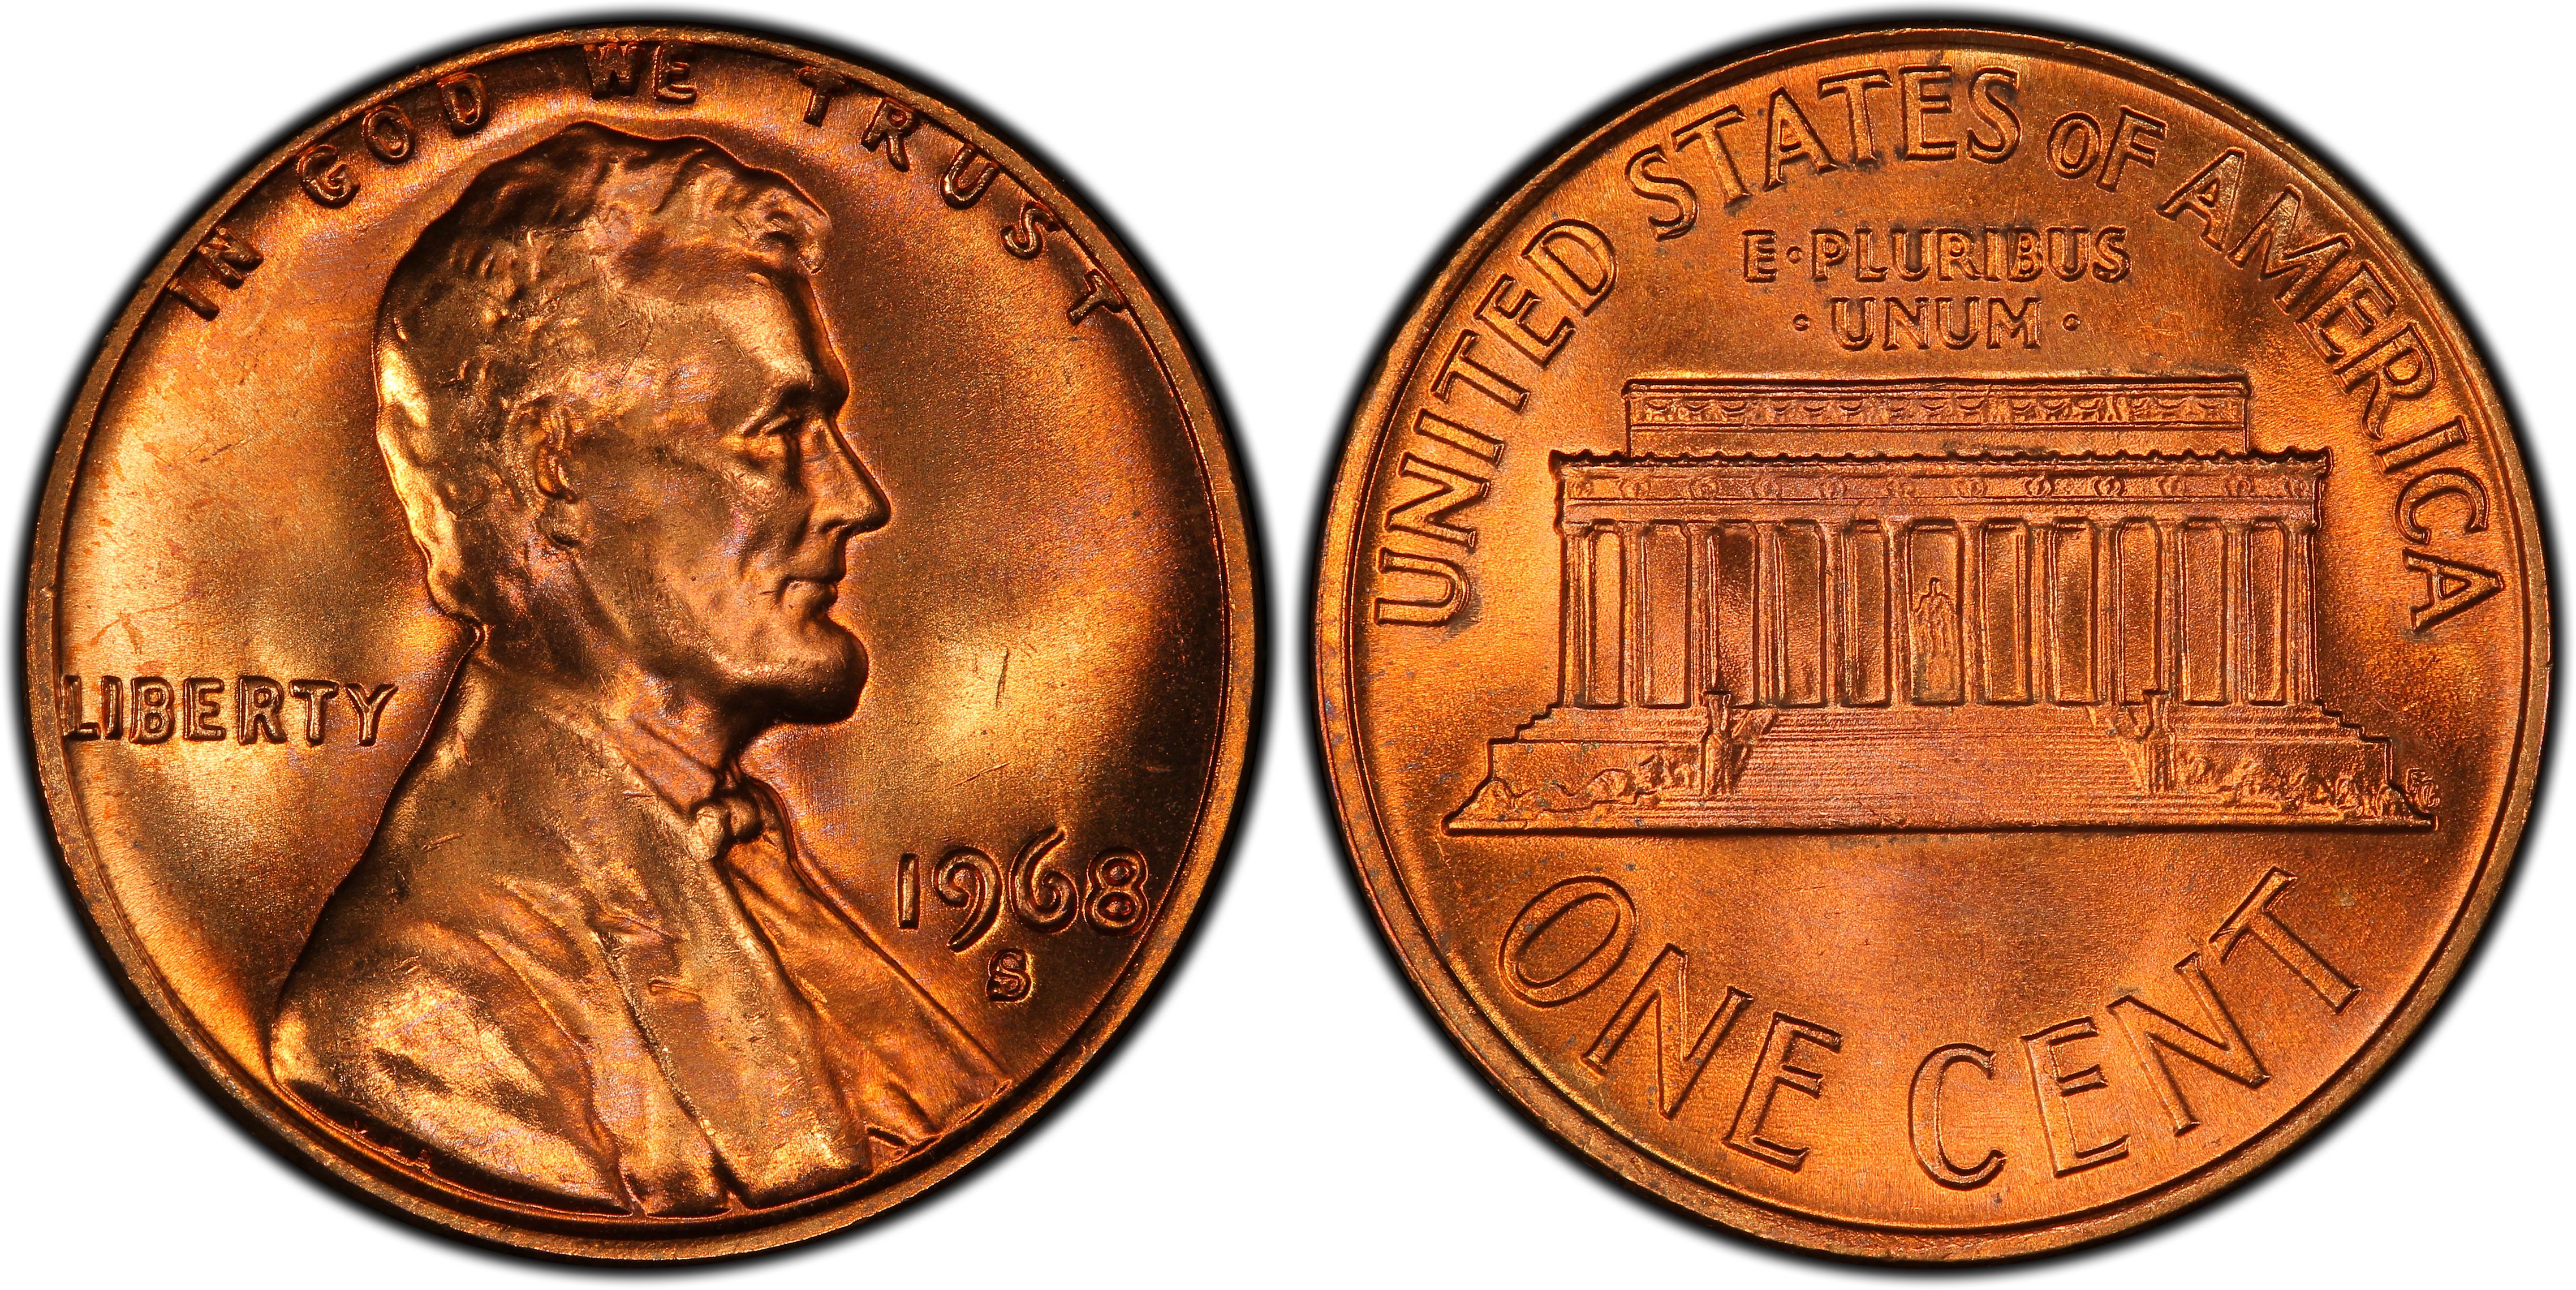 1968 Lincoln penny with errors - circesoftware.net